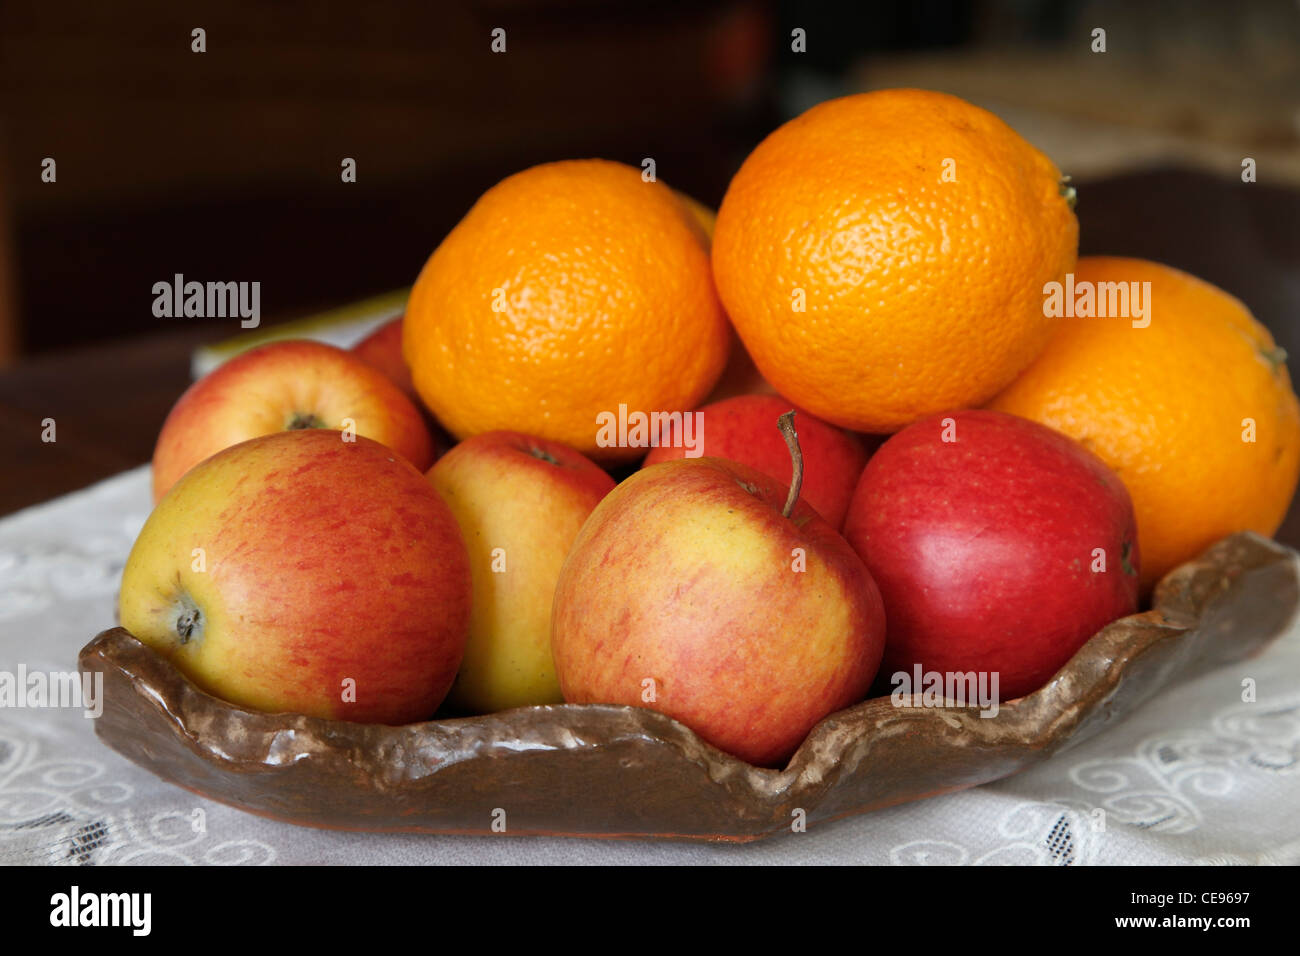 fruit bowl containing oranges and apples Stock Photo